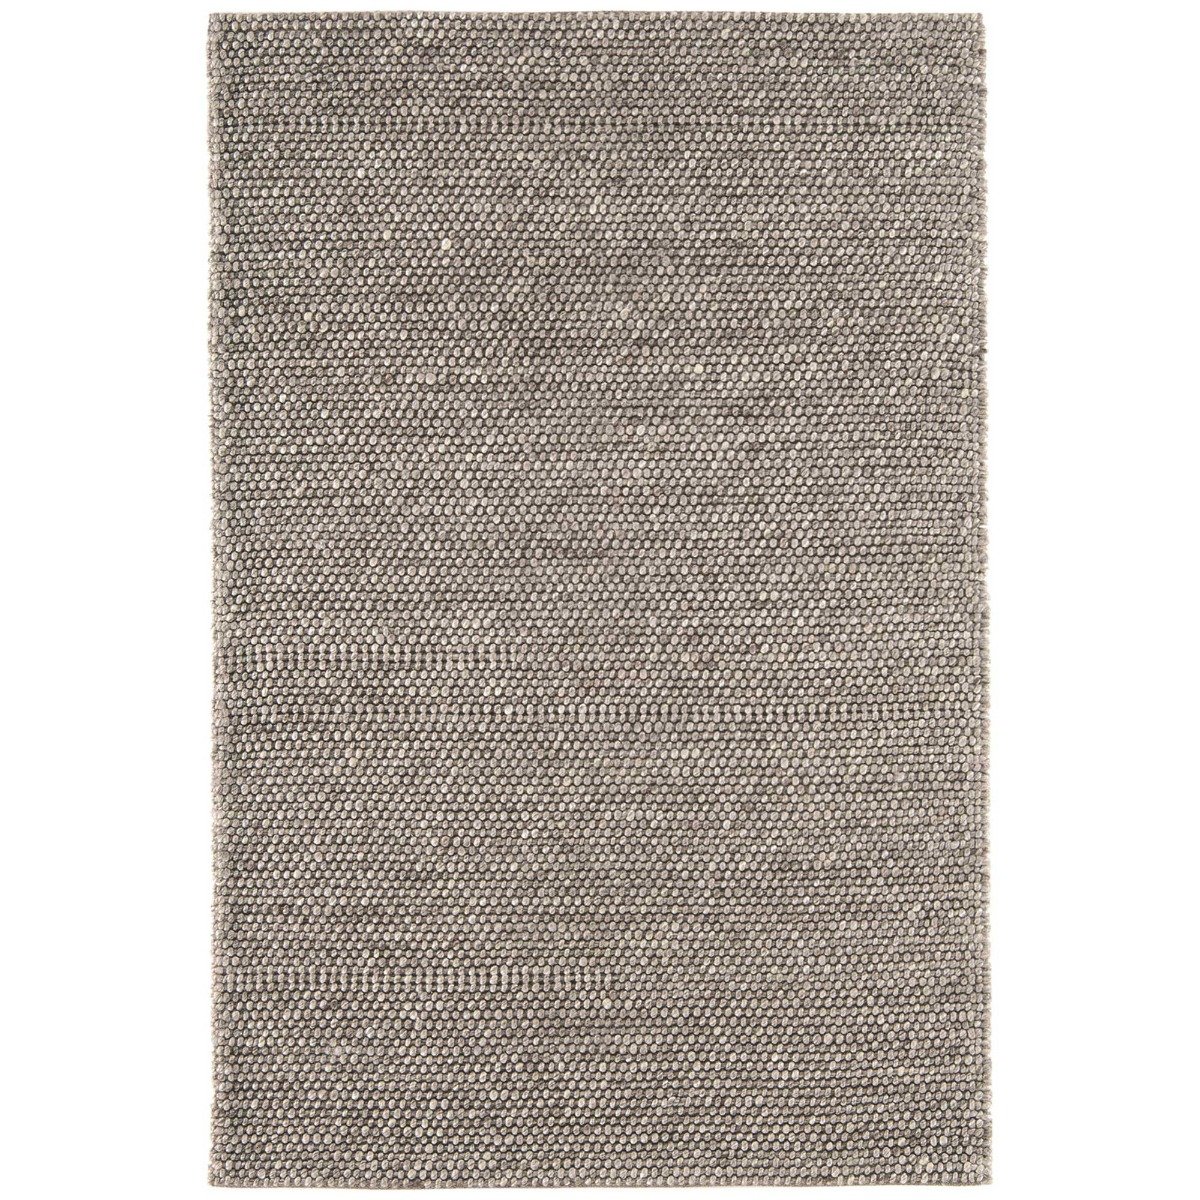 Flori Woven Taupe 160x230cm Rug, Square Wool Blend | W160cm | Barker & Stonehouse